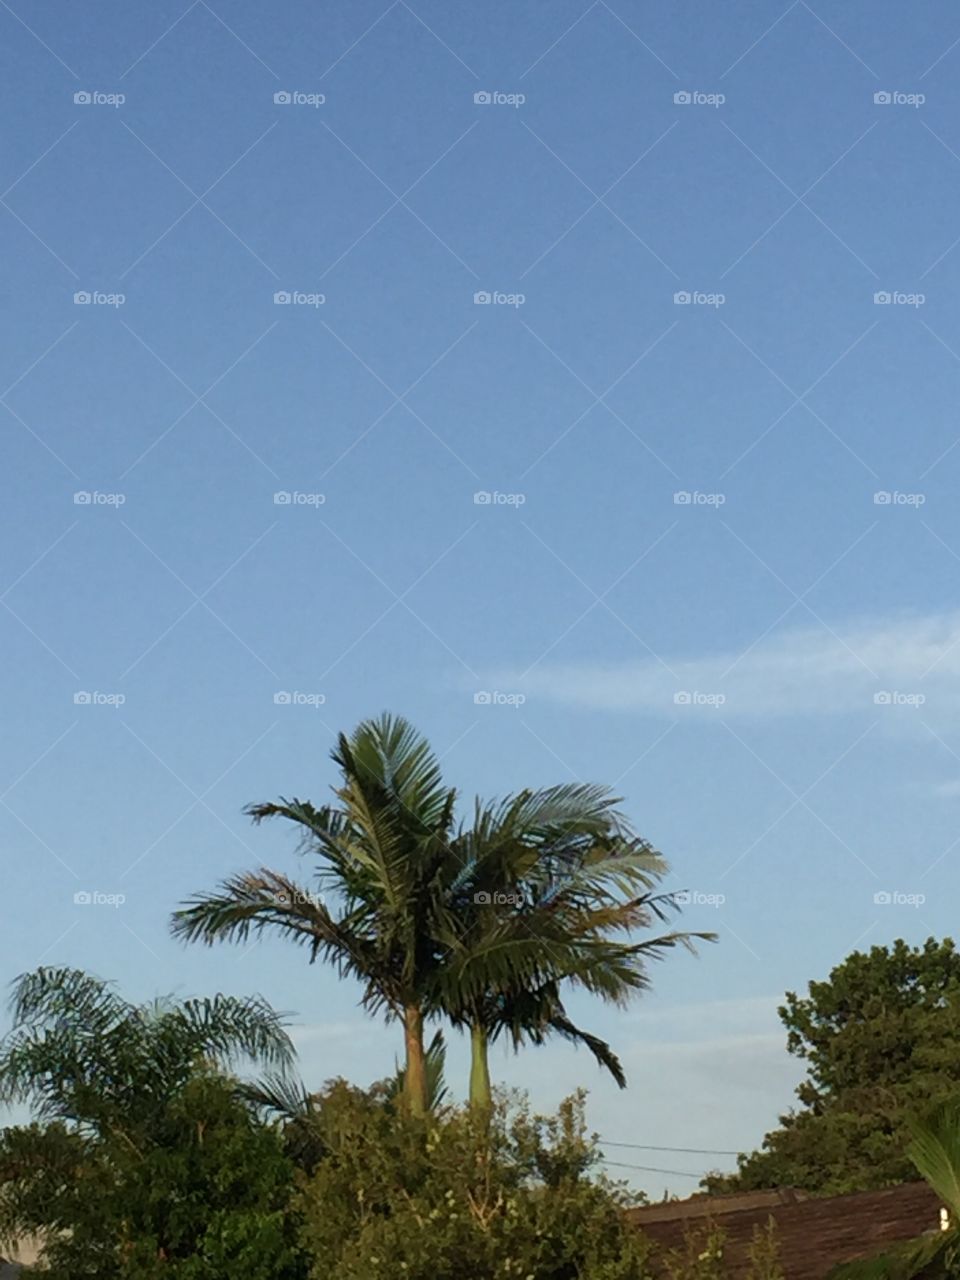 Palm trees over a clear blue sky with fluffy clouds